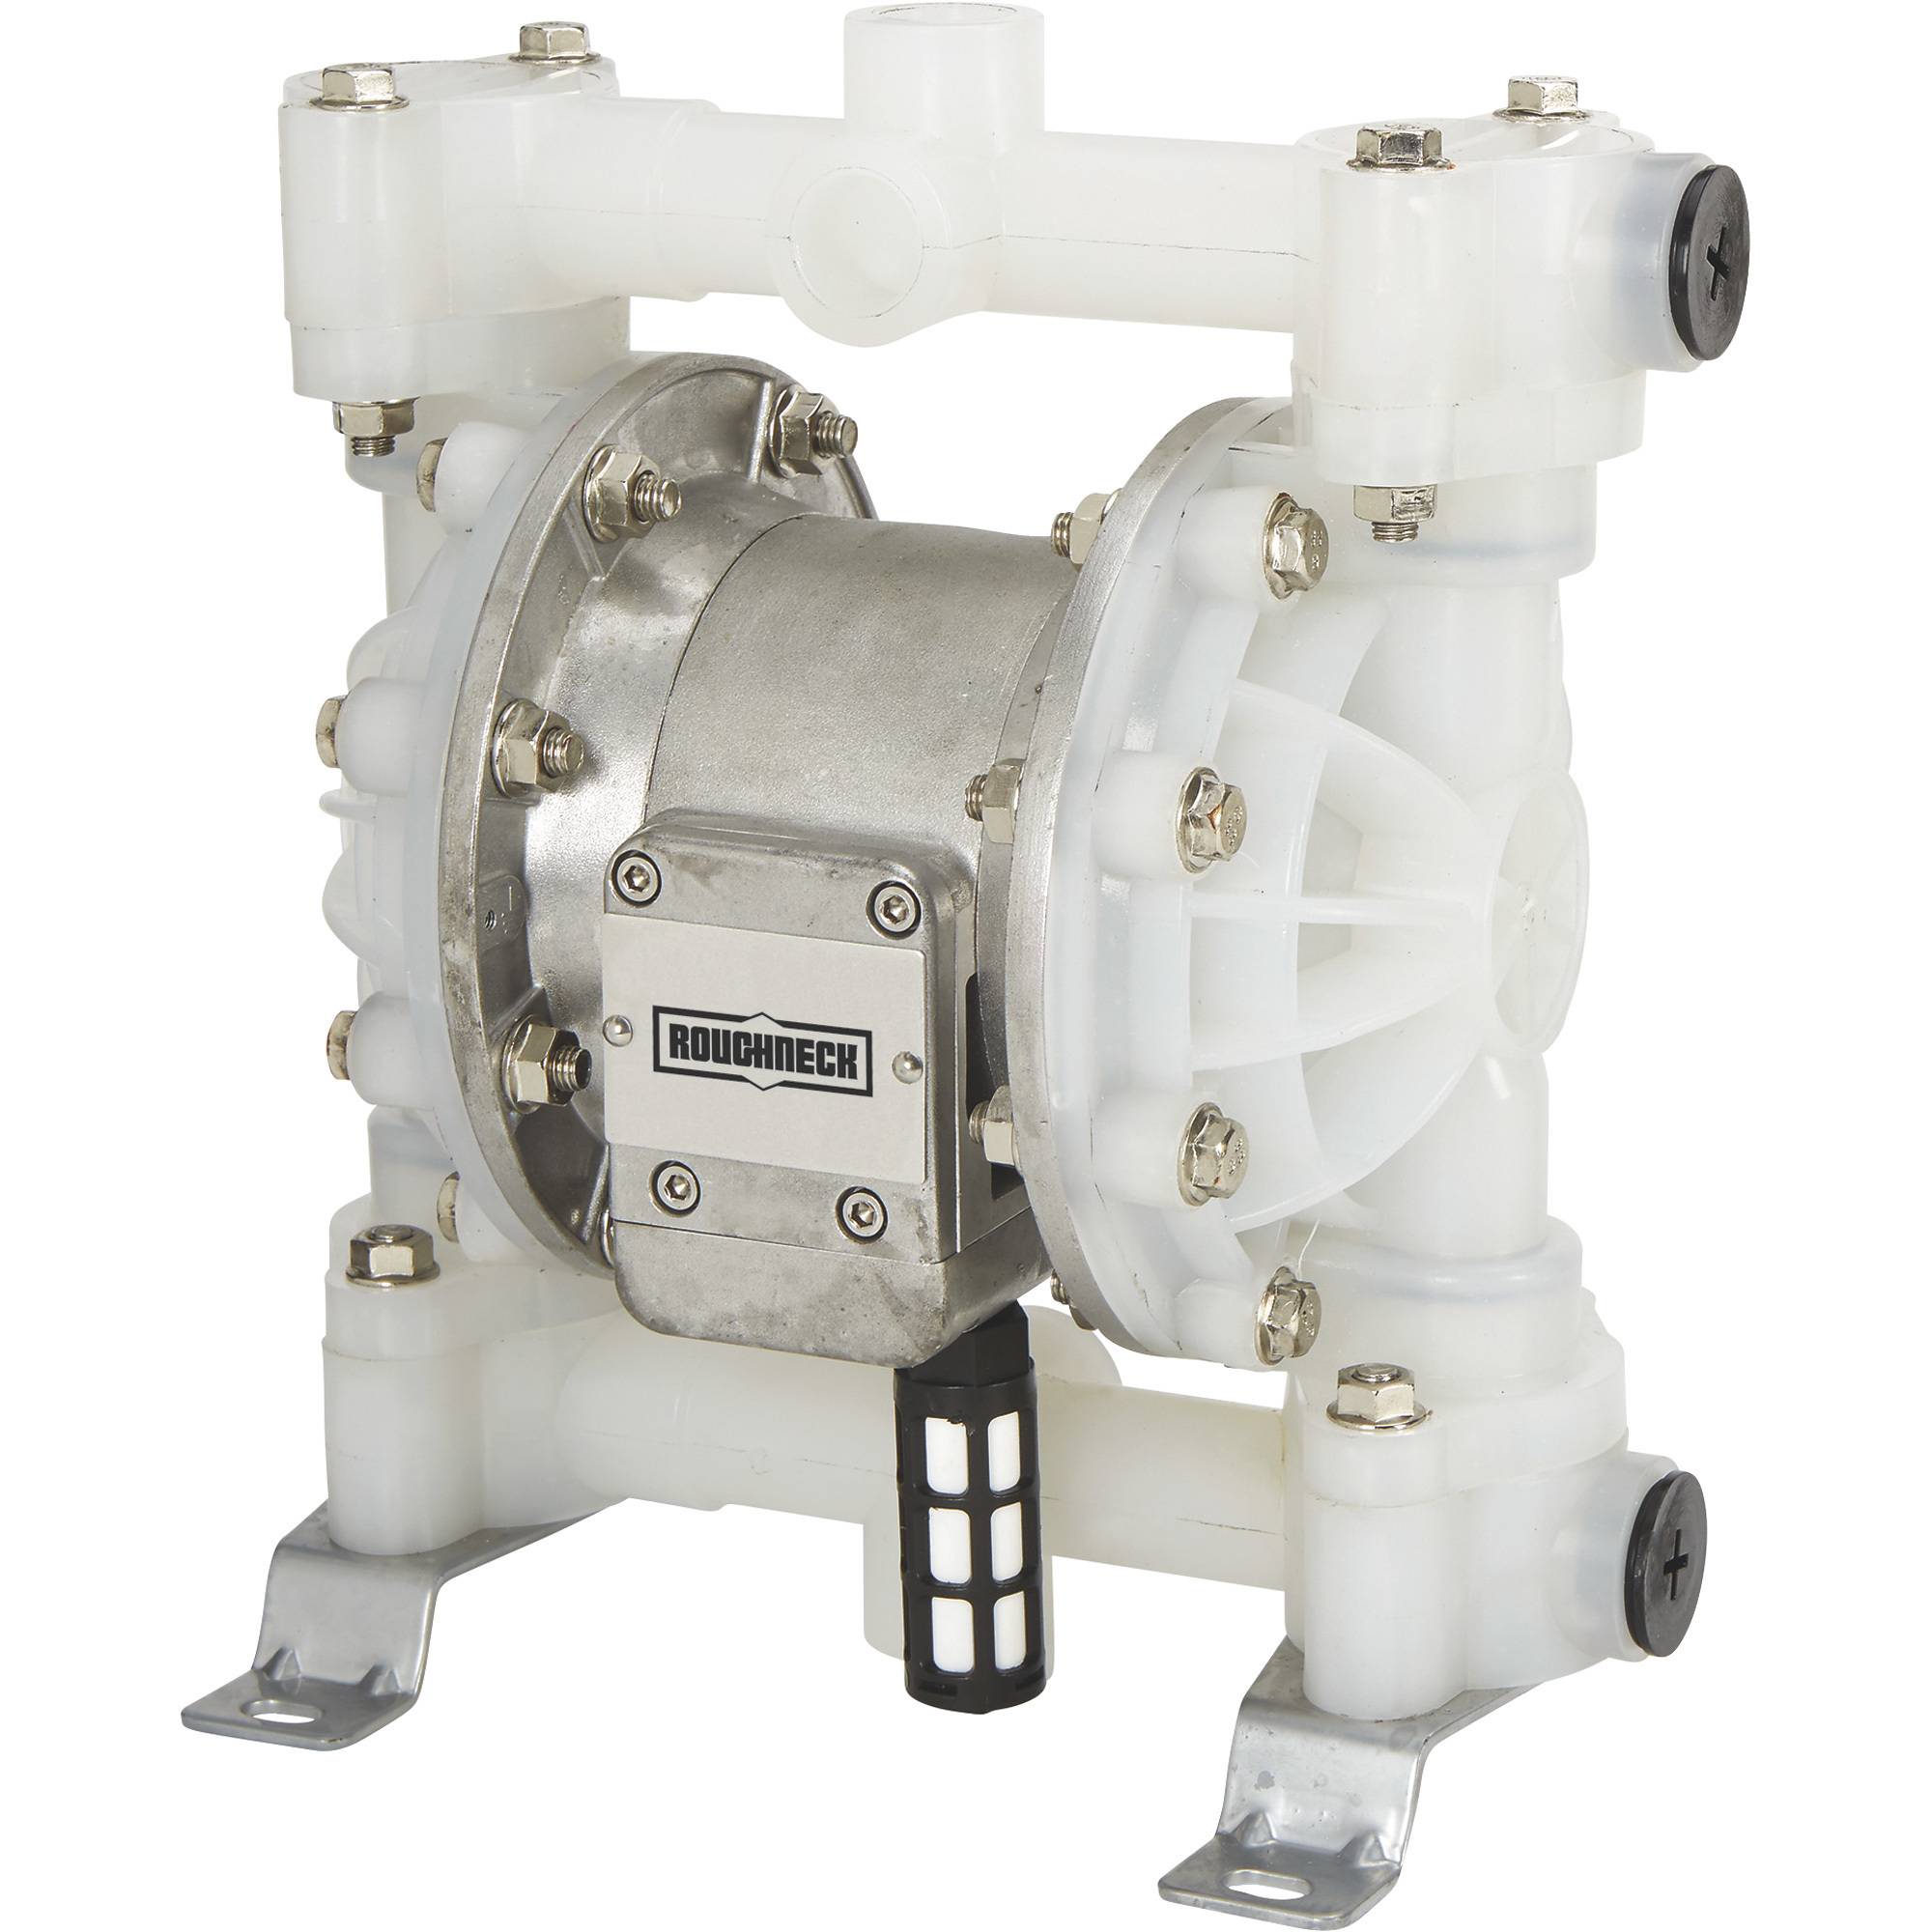 Roughneck Air-Operated Double Diaphragm Pump, 3/4in. Ports, 16 GPM 